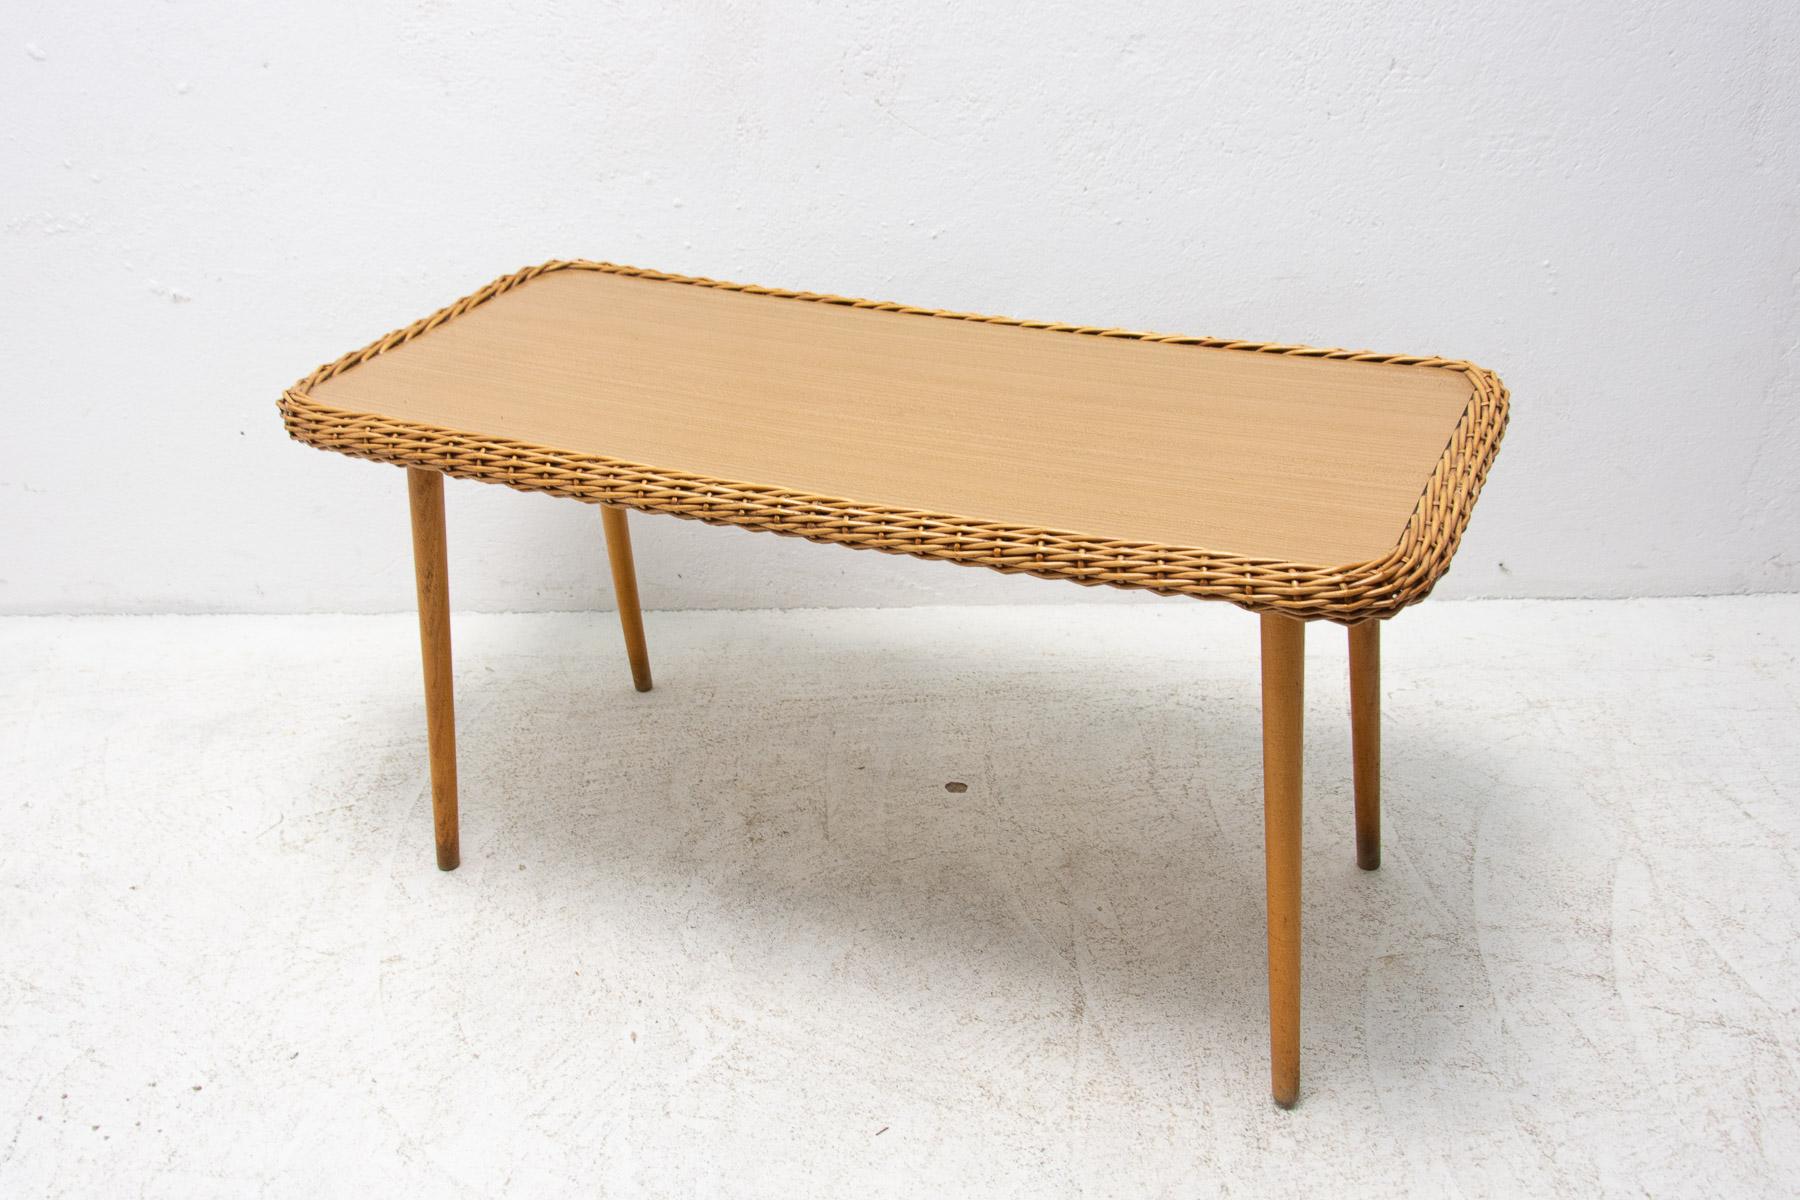 This coffee table with a formica and wicker plate was made by ULUV company in the former Czechoslovakia in the 1960´s. Beech wood legs. In good Vintage condition, bears slight signs of age and use.

Measures: Height: 53 cm

Lenght: 107